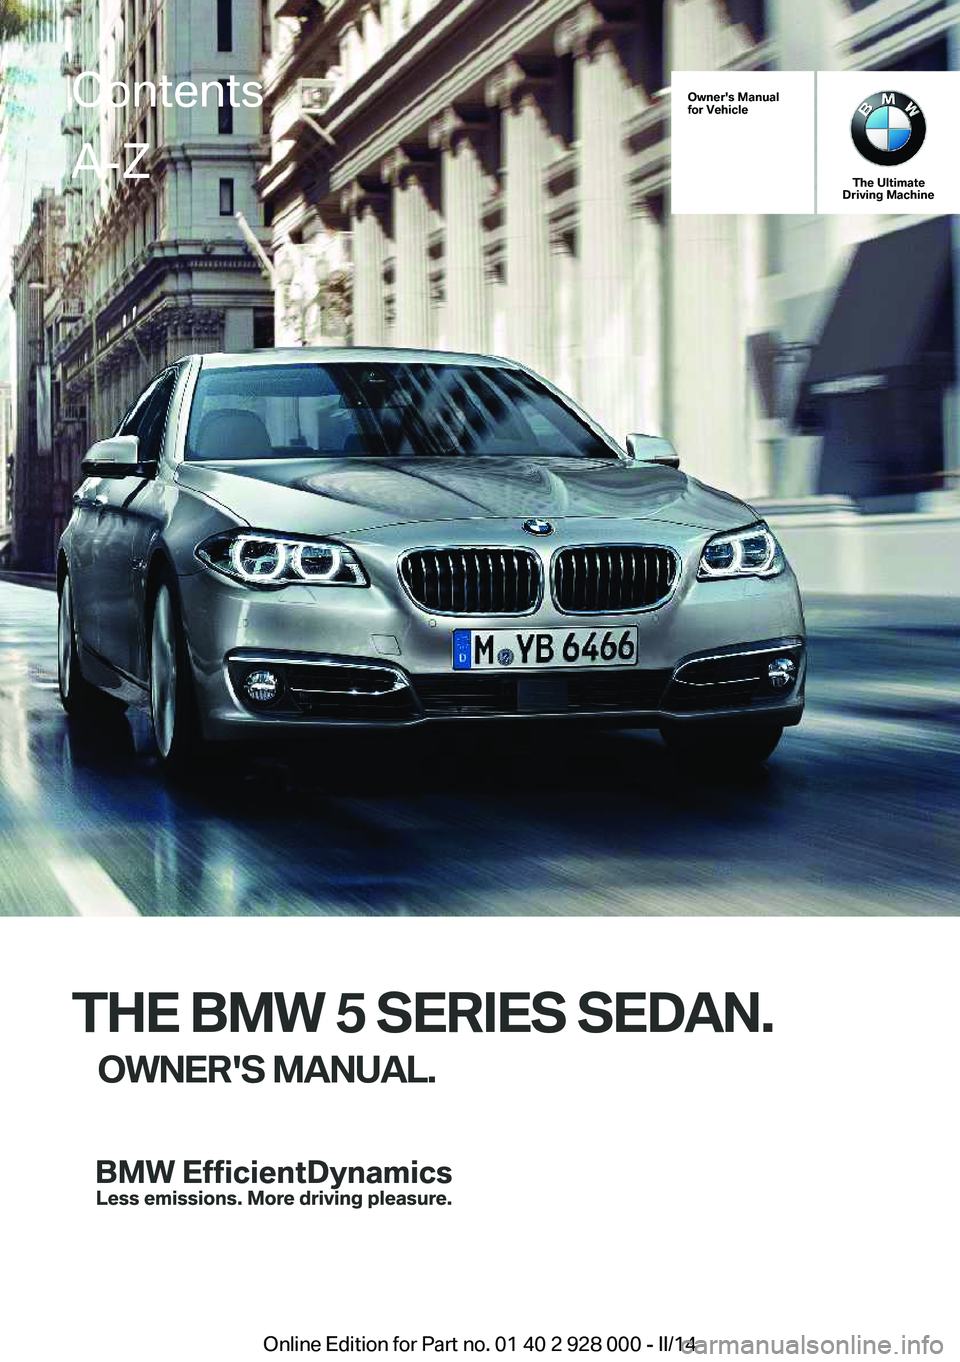 BMW 528I 2014  Owners Manual Owner's Manual
for Vehicle
The Ultimate
Driving Machine
THE BMW 5 SERIES SEDAN.
OWNER'S MANUAL.
ContentsA-Z
Online Edition for Part no. 01 40 2 928 000 - II/14   